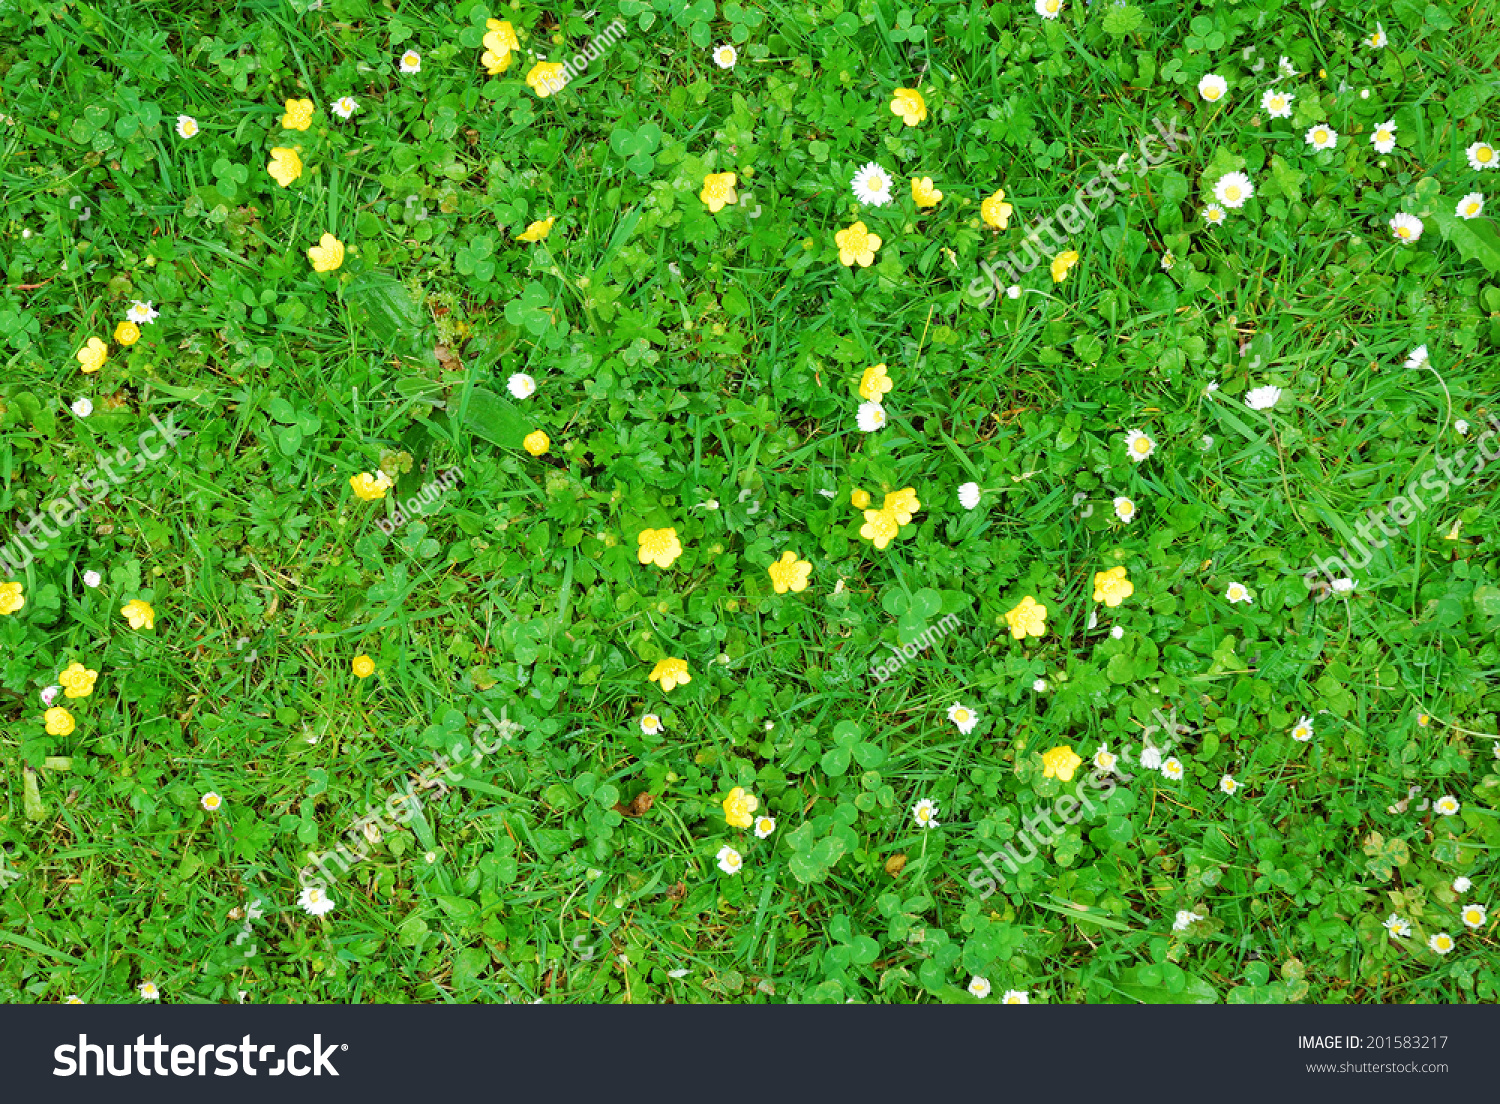 Abstract Green Grass Texture White Yellow Stock Photo 201583217 ...